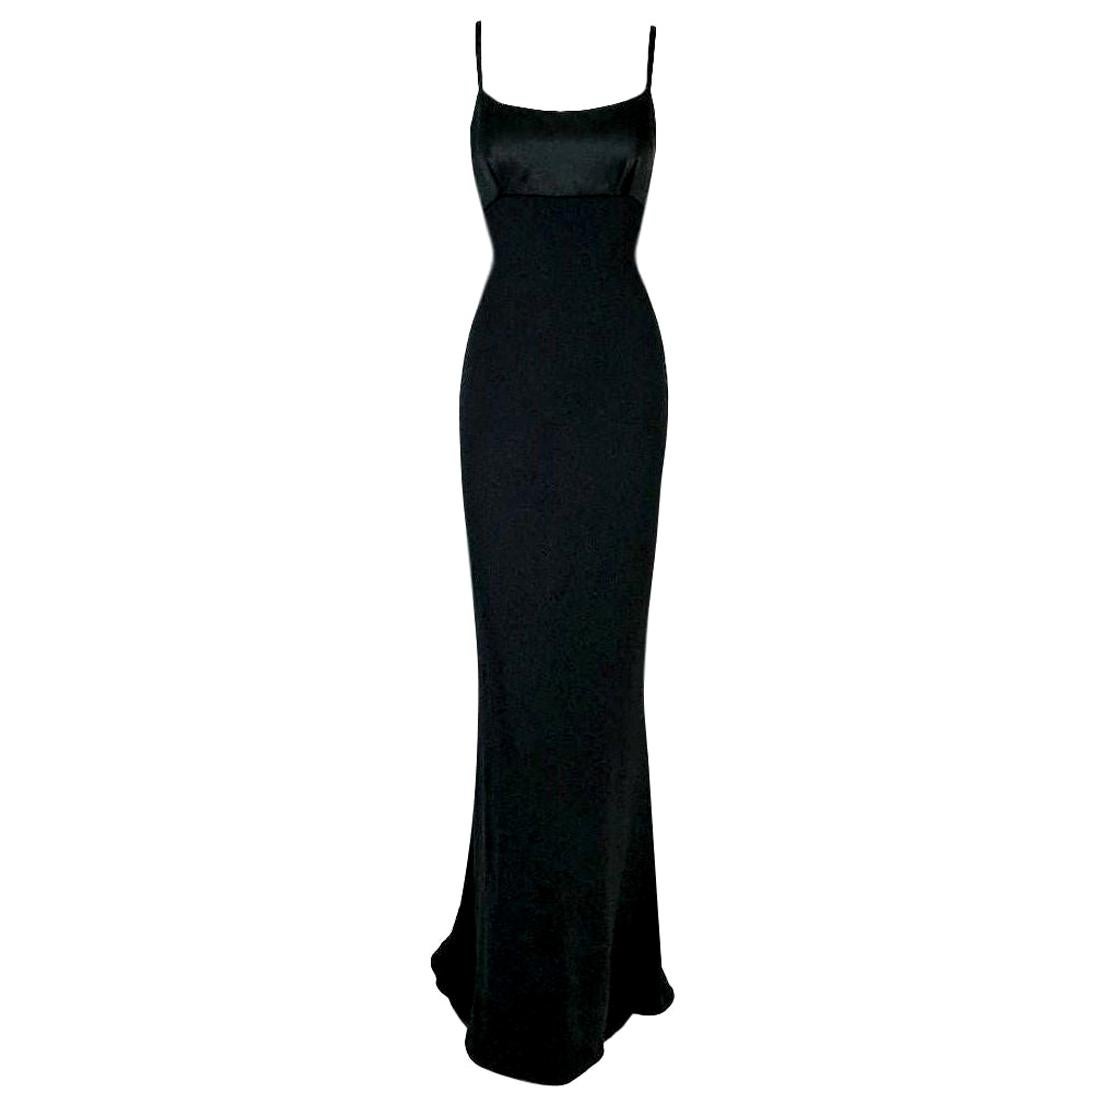 NWT 2001 Gucci by Tom Ford Black Satin Plunging Back Extra Long Gown Dress